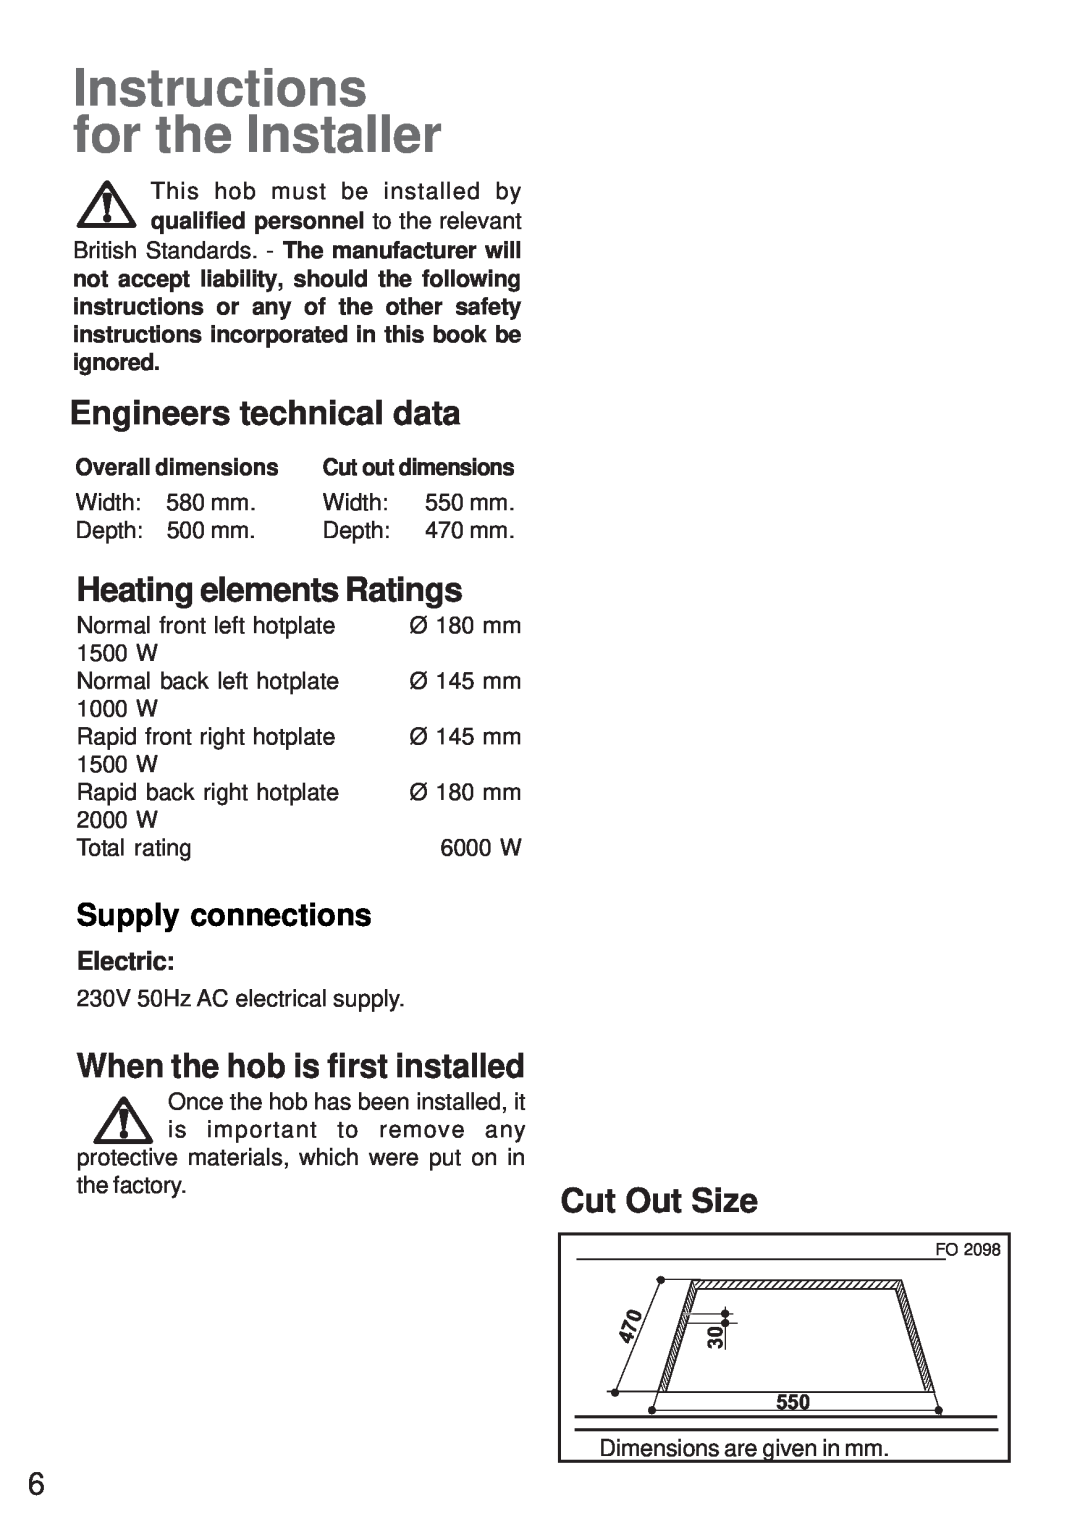 Moffat MEH 631 Instructions for the Installer, Engineers technical data, Heating elements Ratings, Cut Out Size, Electric 